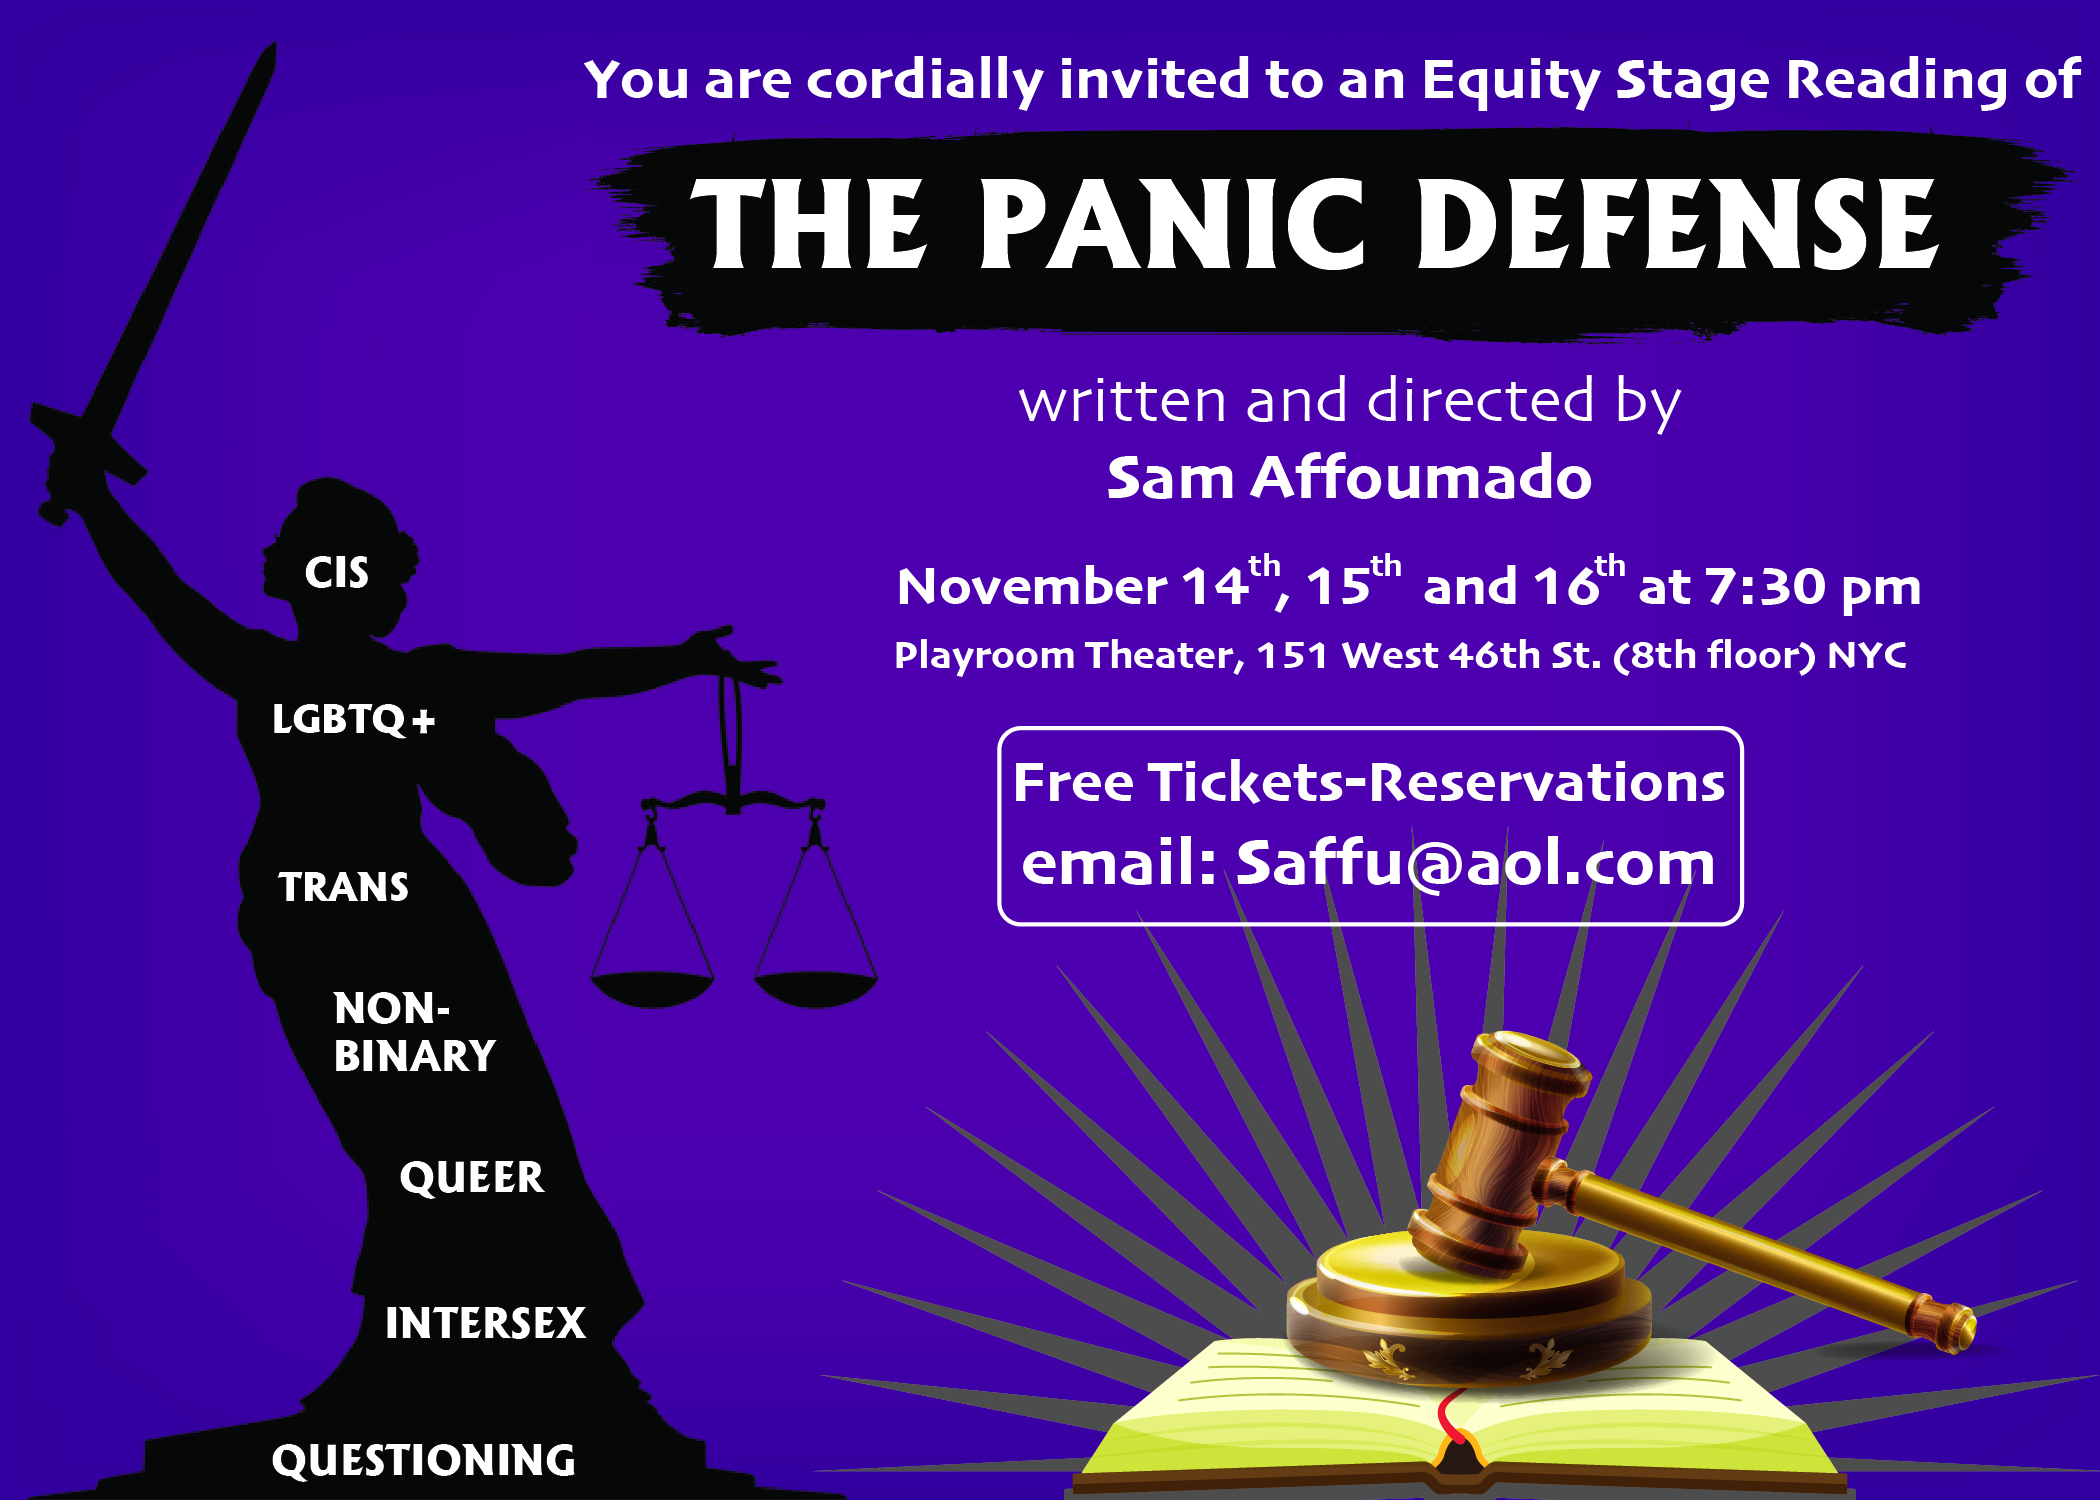 THE PANIC DEFENSE Will Have a Staged Reading at The Playroom Theater 